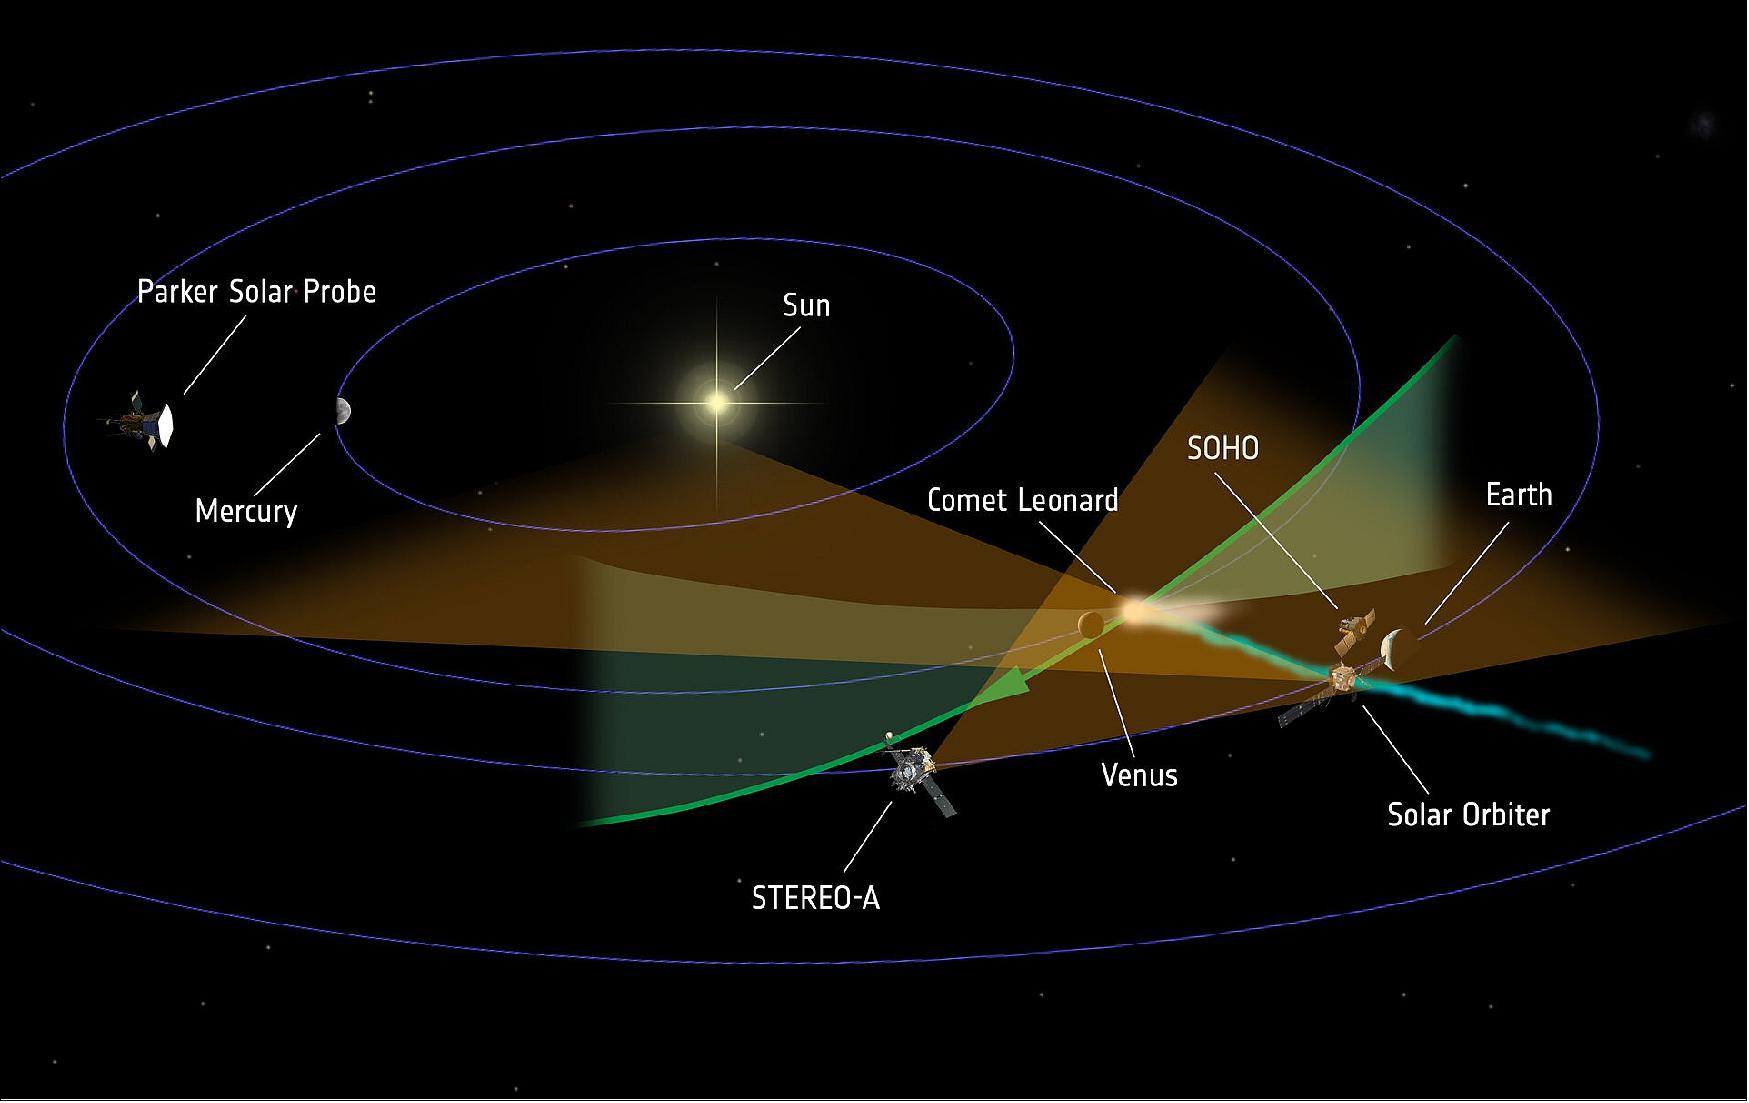 Figure 34: The ESA/NASA Solar Orbiter spacecraft flew through the tail of Comet C/2021 A1 Leonard in December 2021, collecting images and in-situ solar wind and particle data. At the same time, SOHO (ESA/NASA), Parker Solar Probe (NASA) and STEREO-A (NASA) were also watching the comet's evolution from other angles. The graphic shows the approximate relative positions of the planets, comet and spacecraft on 17 December 2021 and is not to scale. Very approximate fields of view are indicated for selected instruments: SoloHI on Solar Orbiter and SECCHI on STEREO-A [image credit: G. Jones & S. Grant (UCL)]